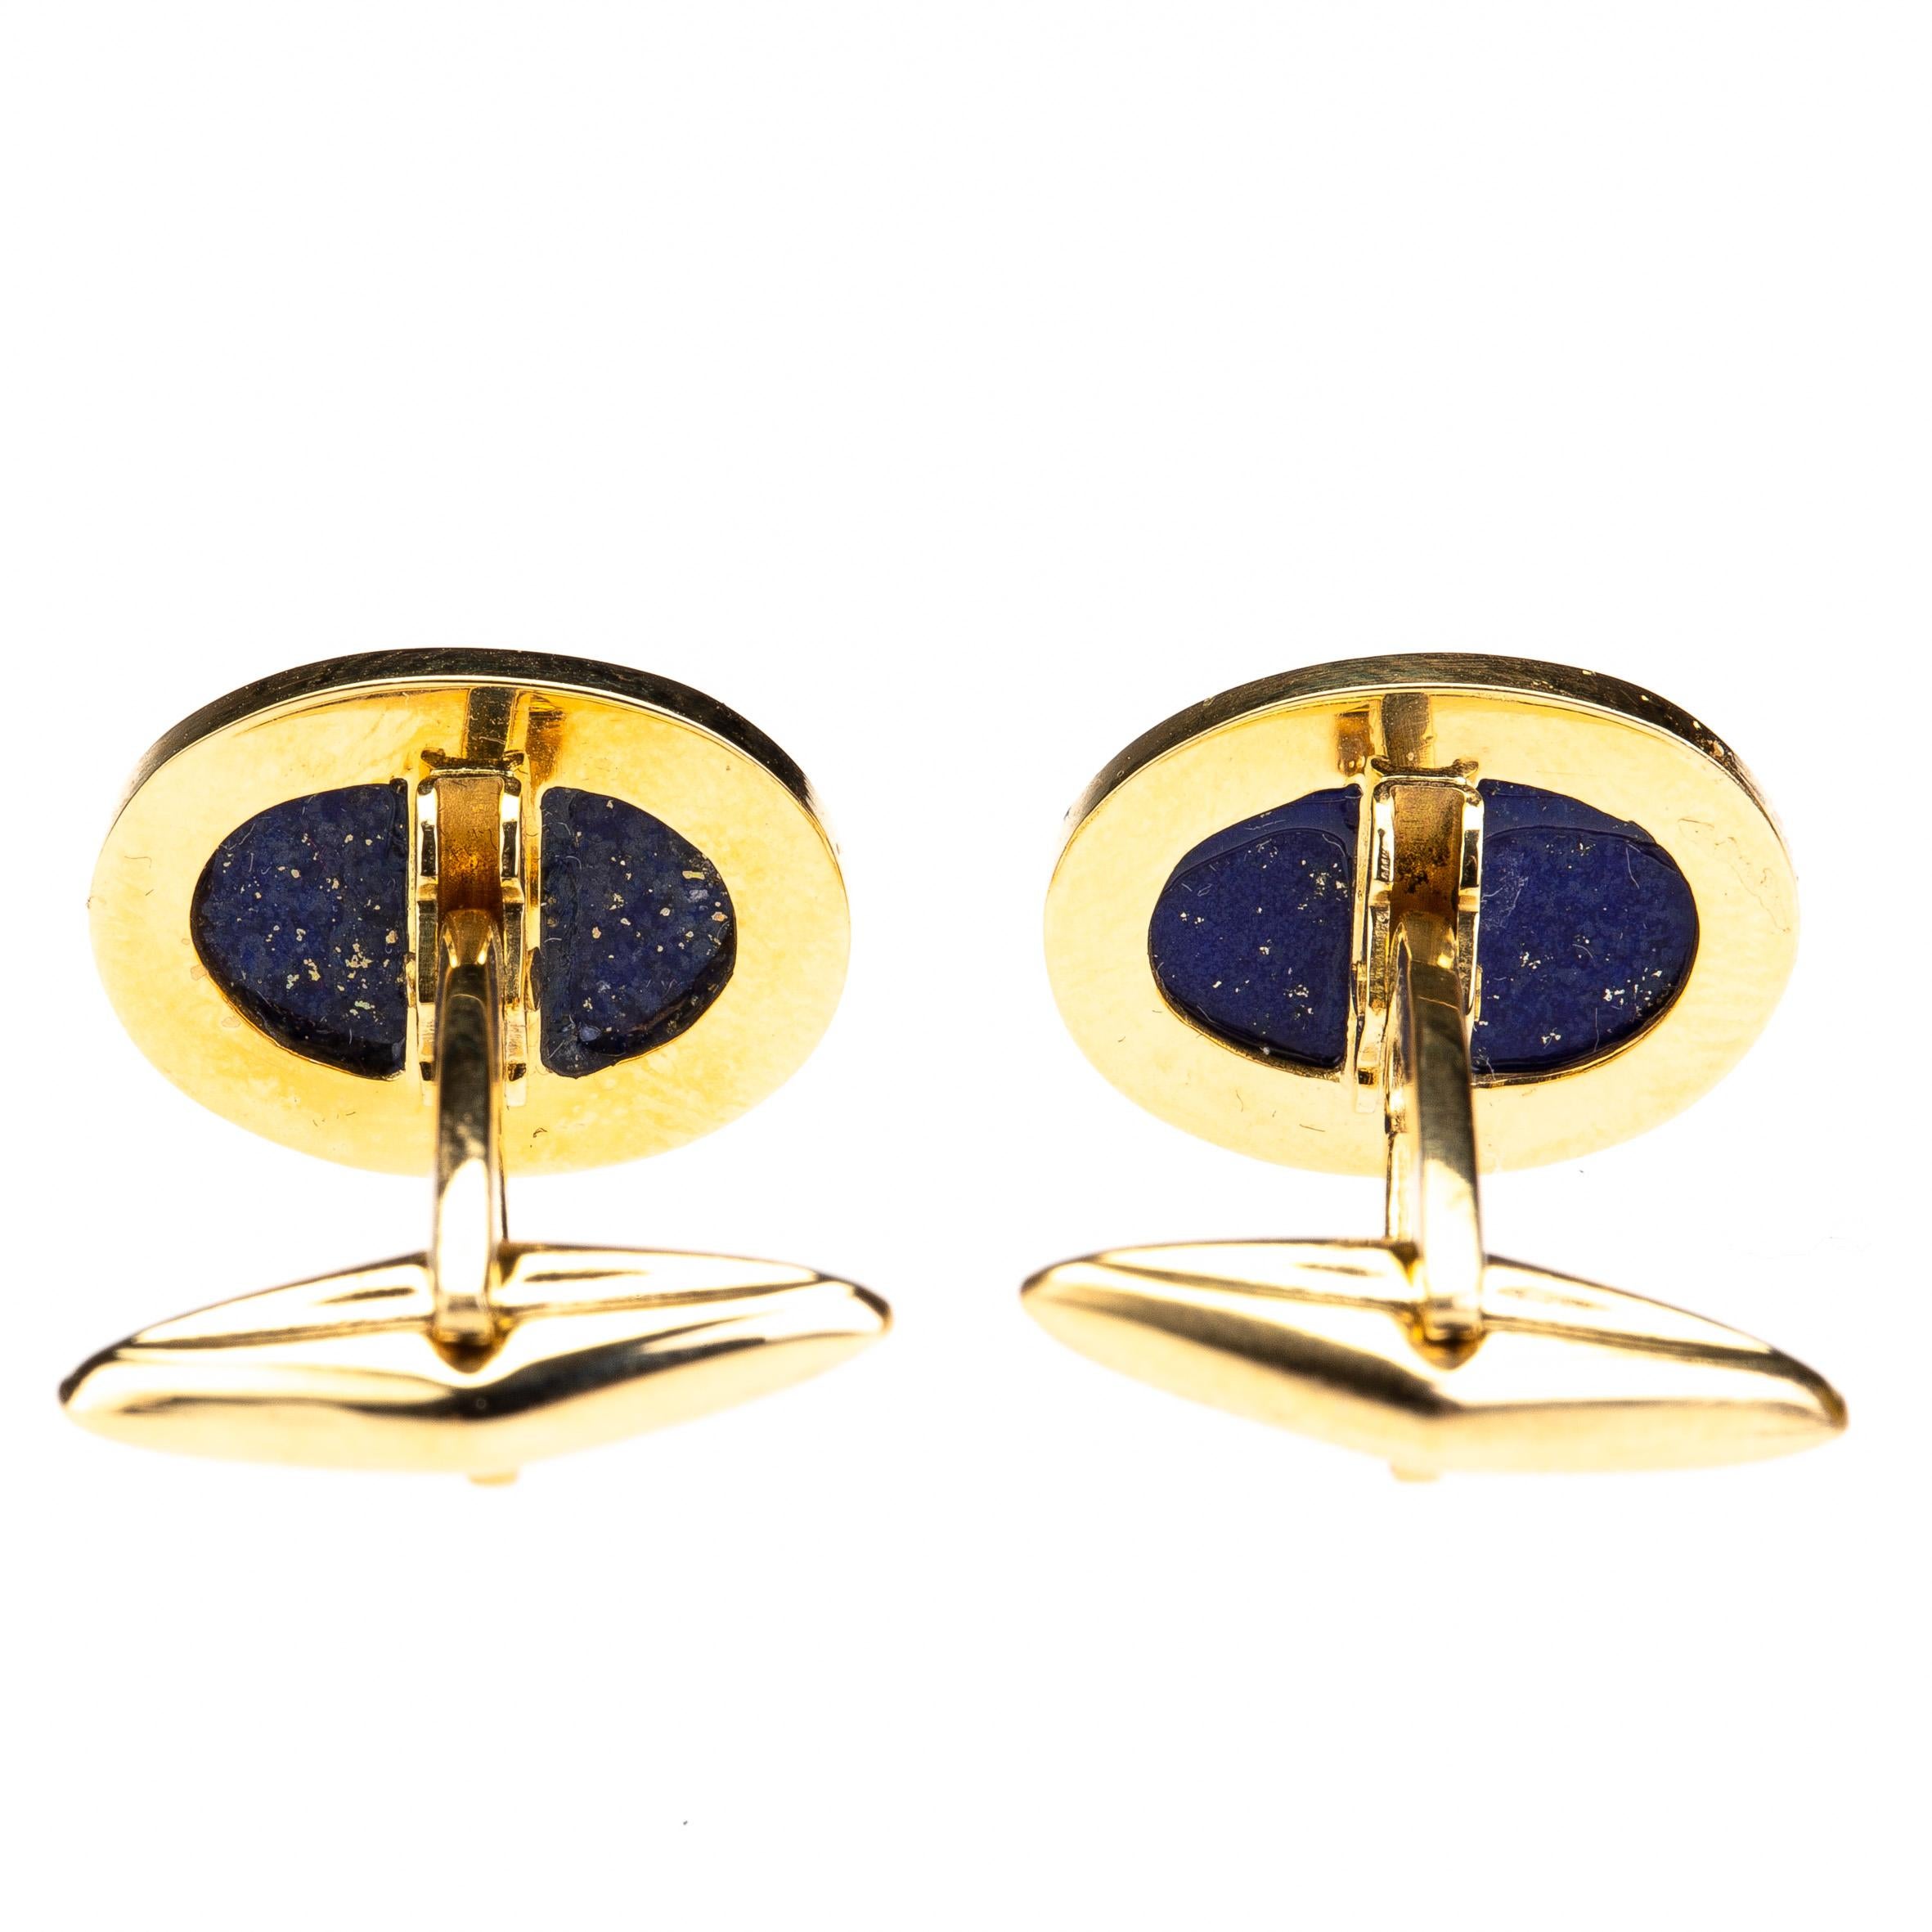 Lapis Cabochon 18 k Gold Cufflinks gr 8,90 unique pieces.

All Giulia Colussi jewelry is new and has never been previously owned or worn. Each item will arrive at your door beautifully gift wrapped in our boxes, put inside an elegant pouch or jewel